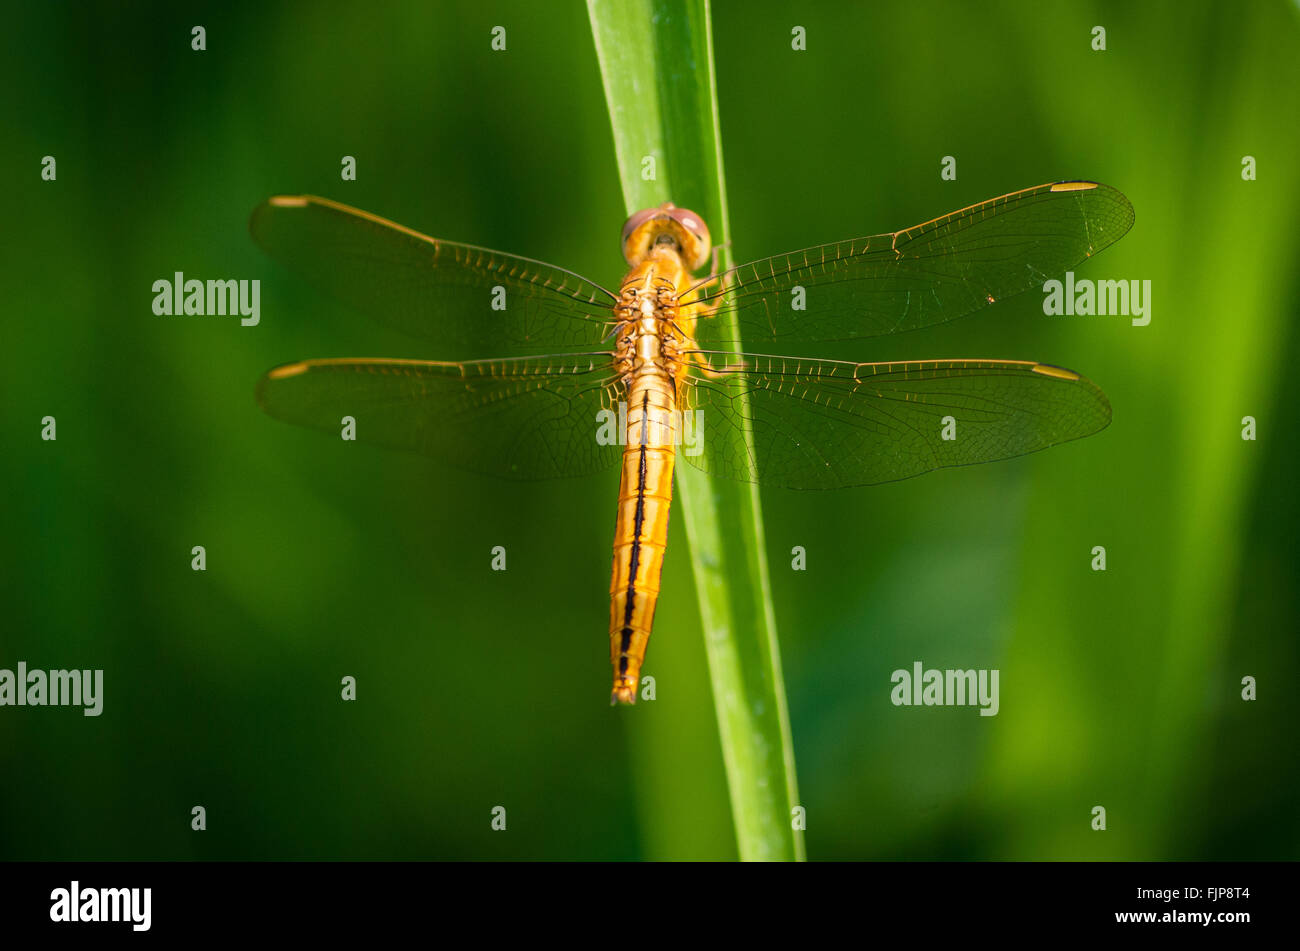 A golden dragonfly on a blade of grass, Ubud, Bali, Indonesia. Stock Photo